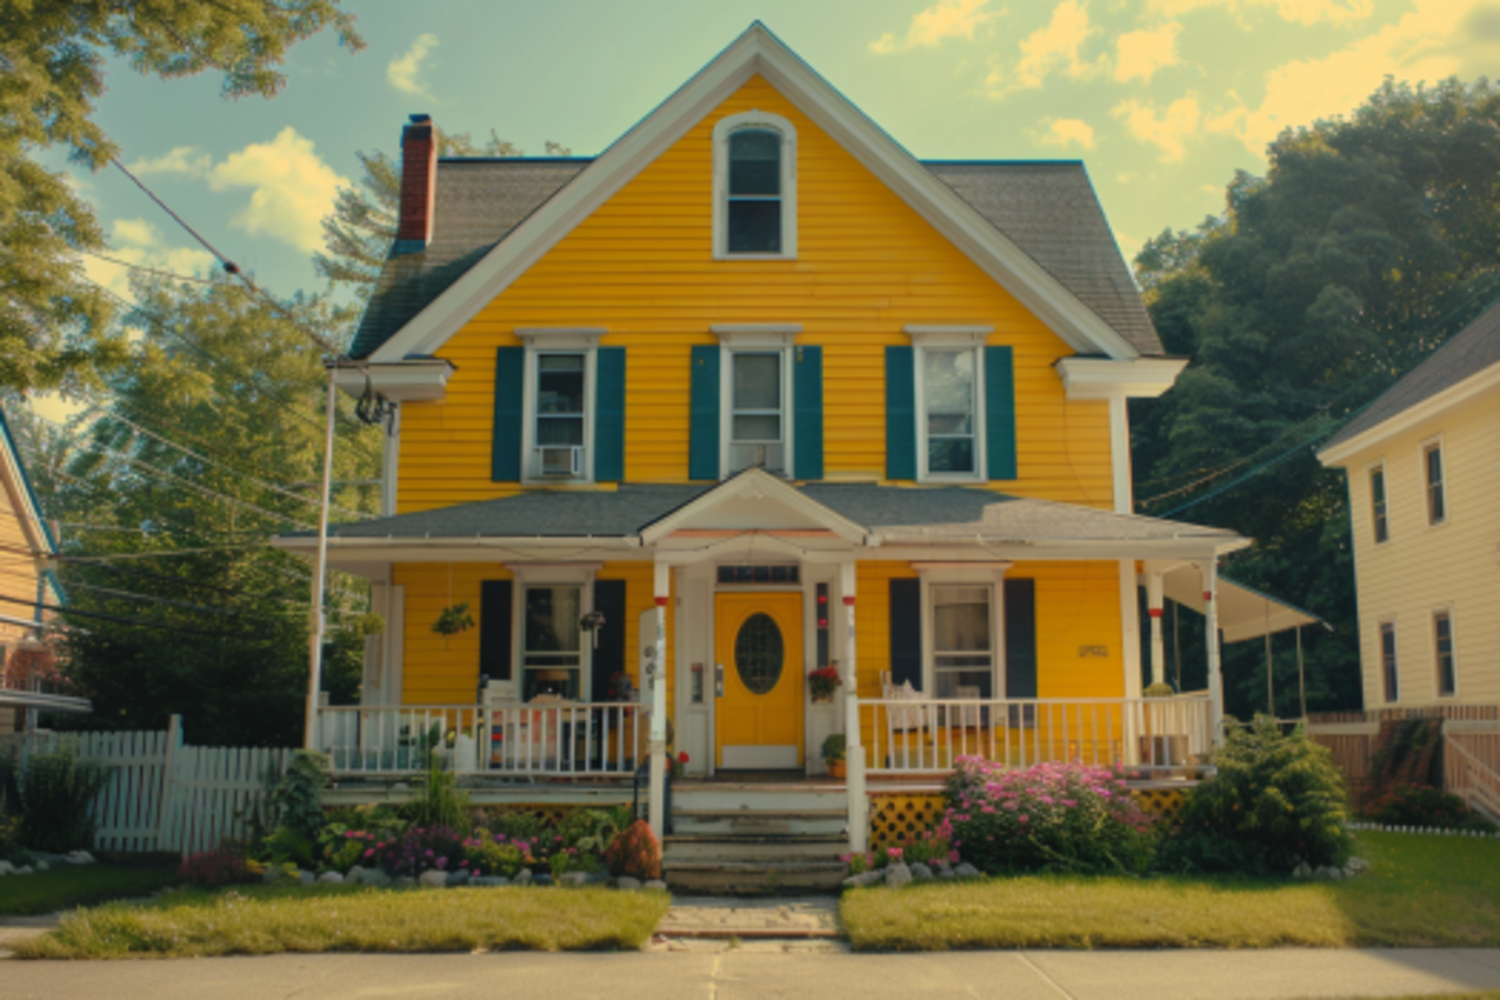 A bright yellow house | Source: Midjourney